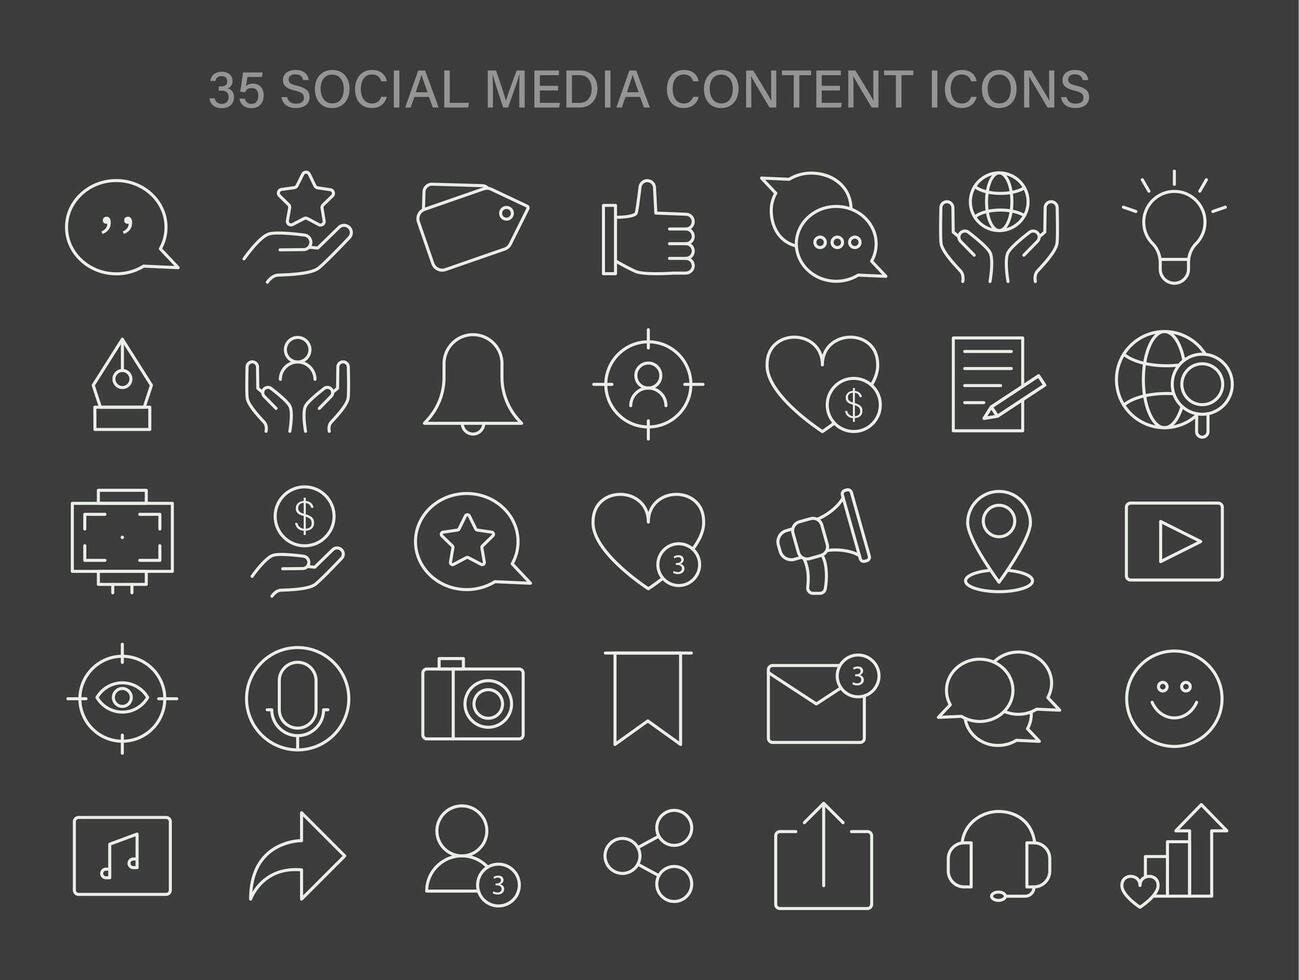 Social Media Content icons set. Array of digital engagement and network interaction icons. vector